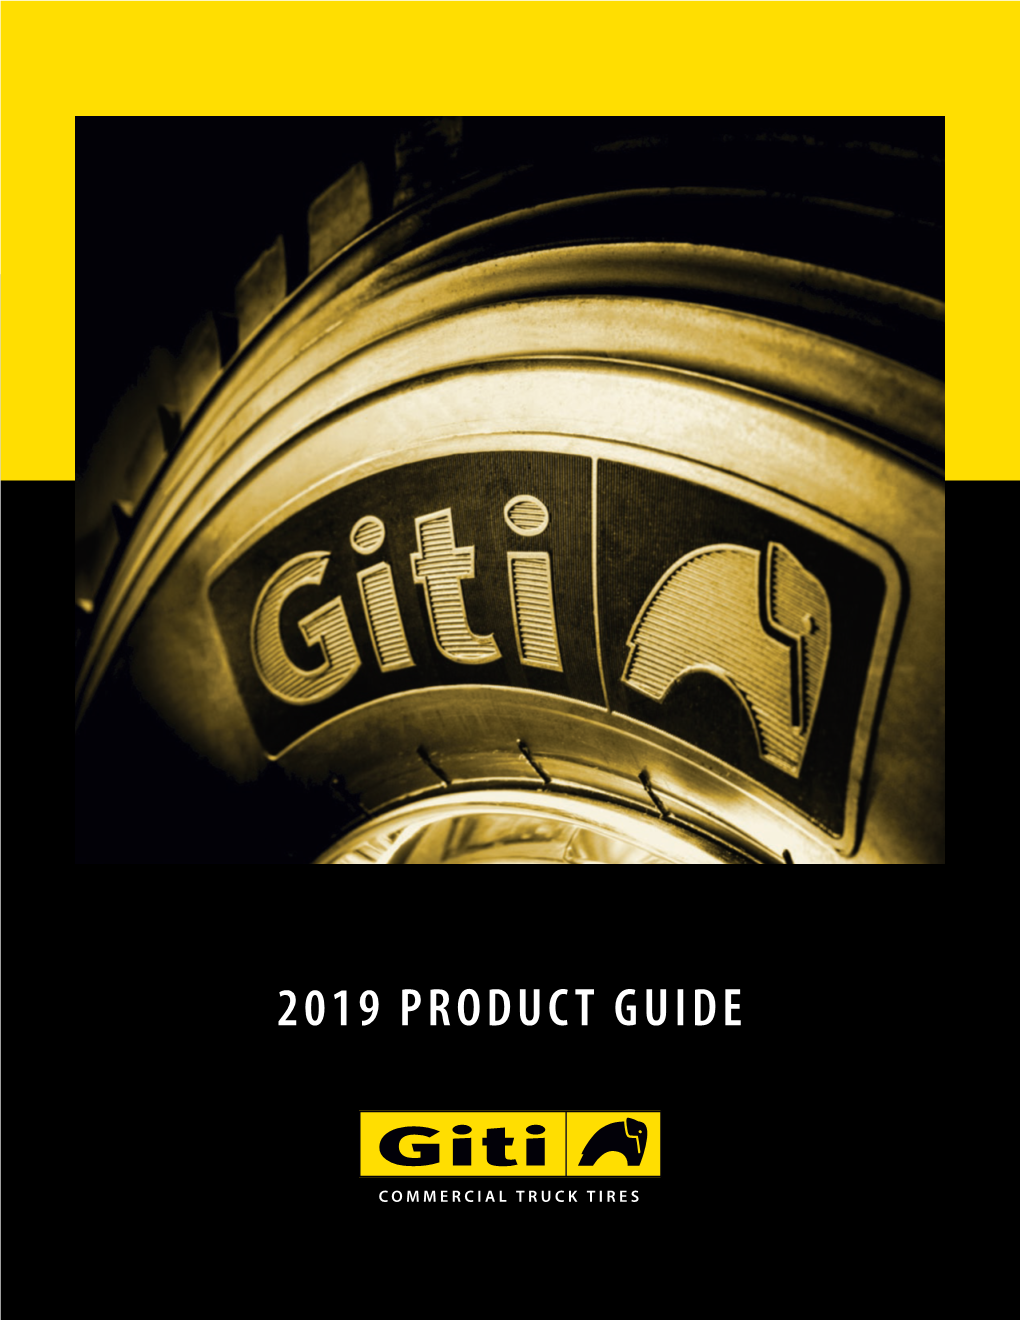 Commercial Truck Tires 2019 Product Guide